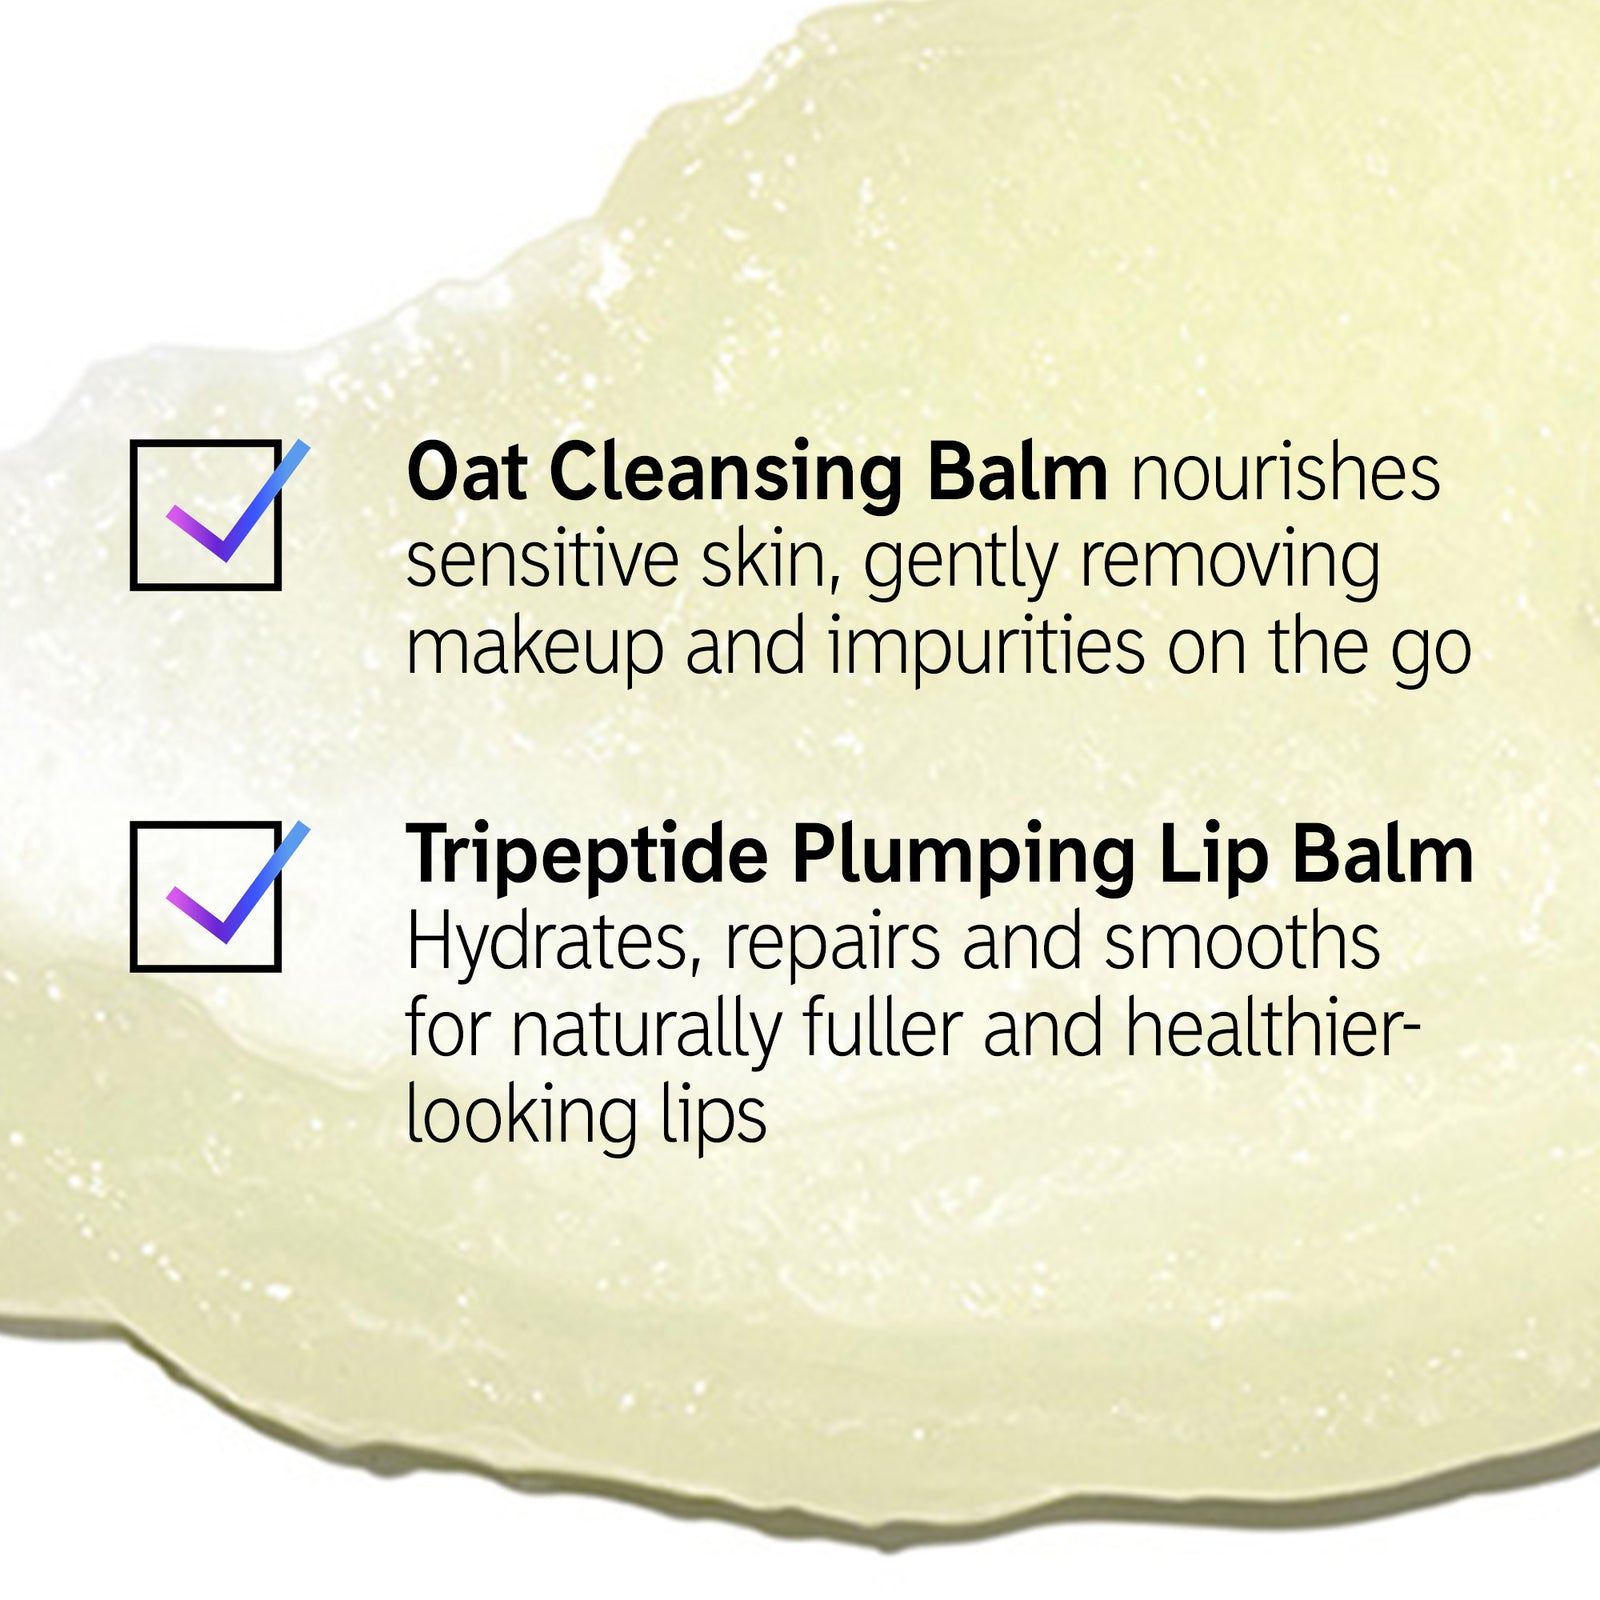 Goop with text overlay of Oat Cleansing Balm and Tripeptide Plumping Lip Balm Benefits